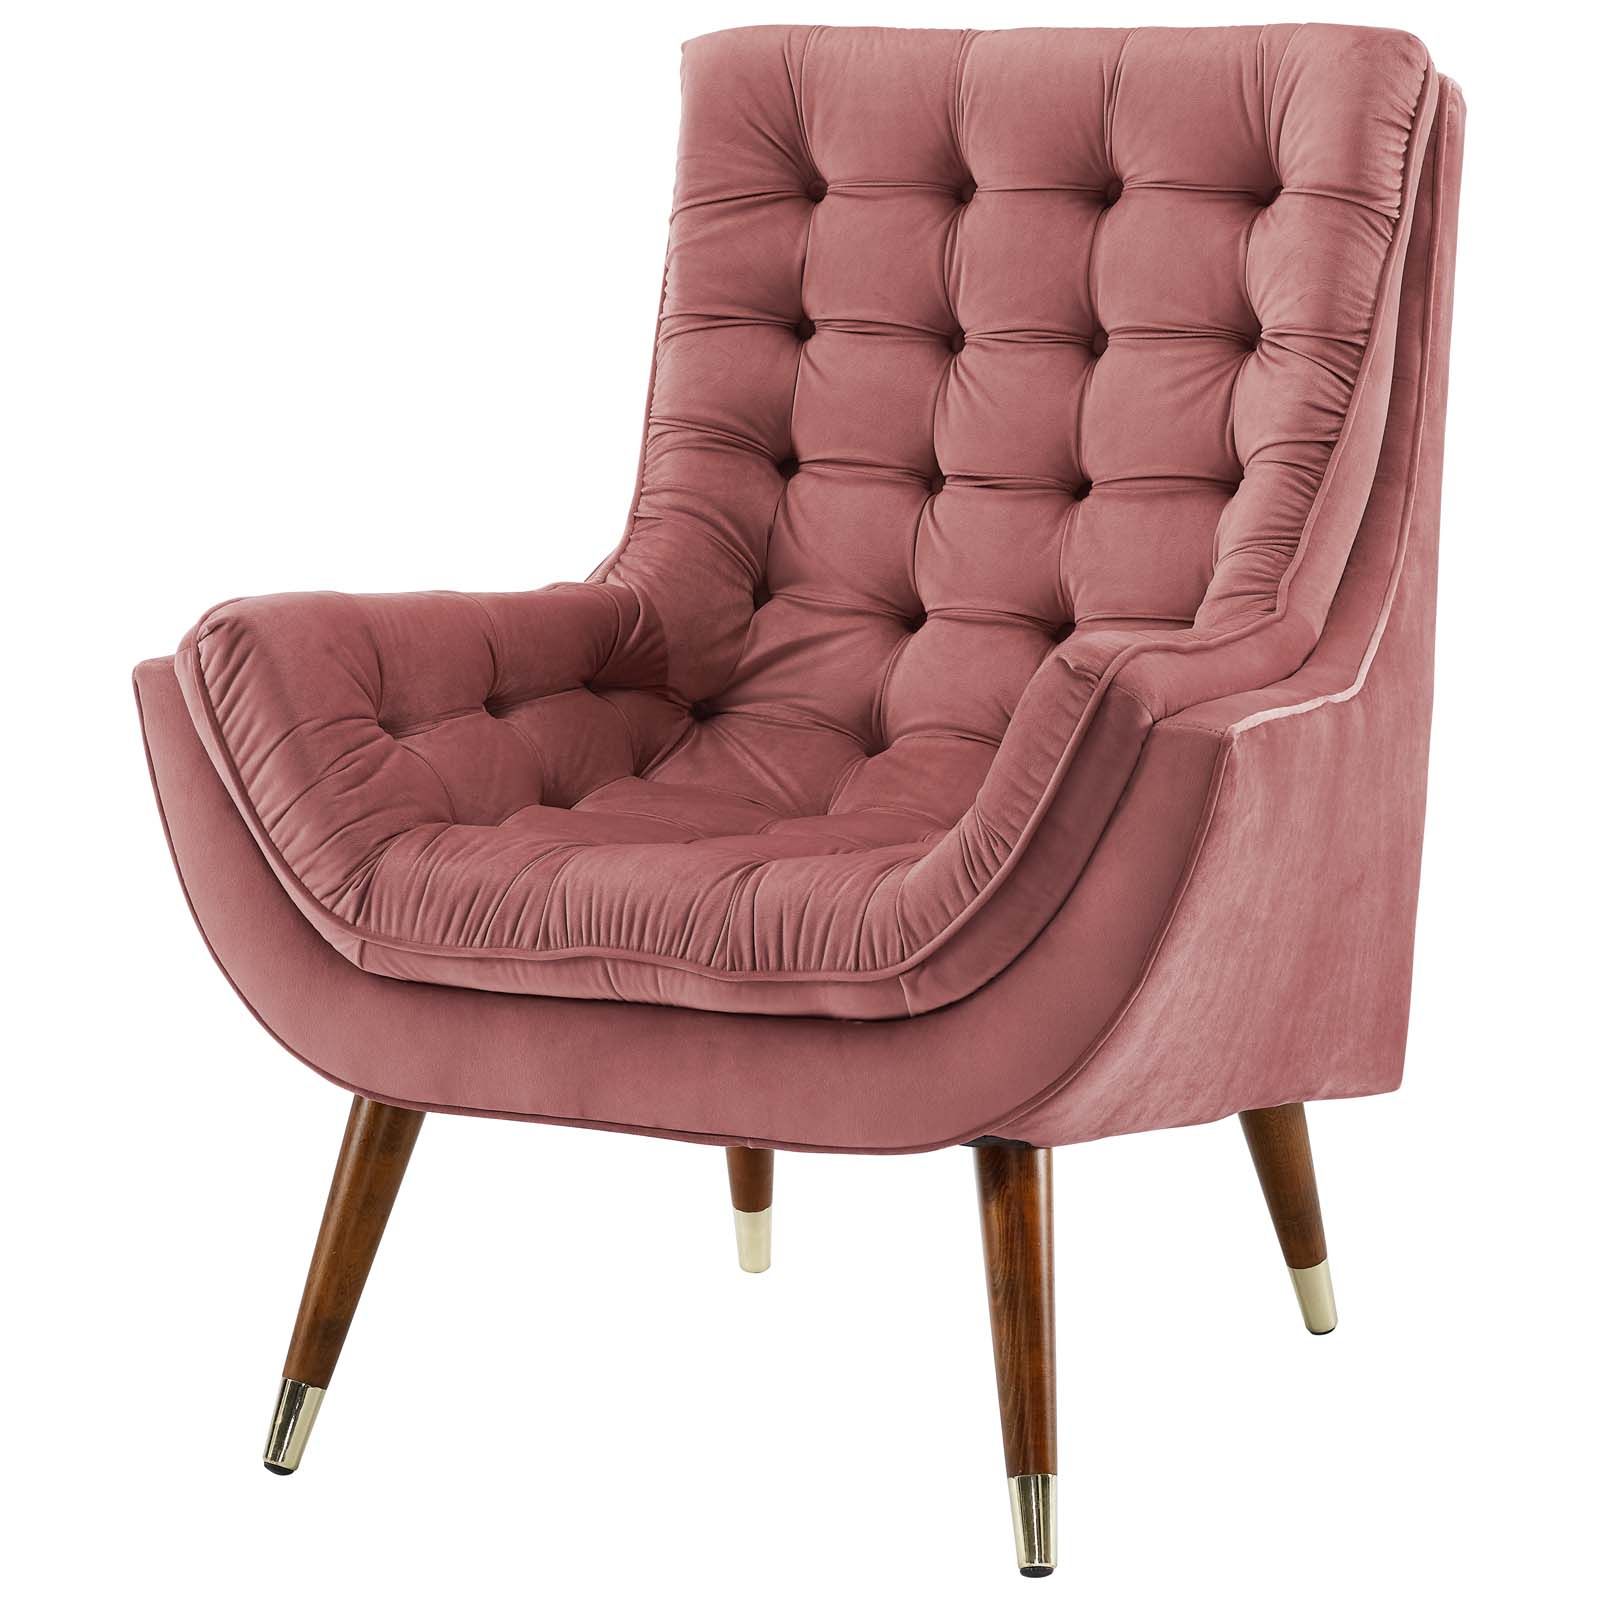 20 Inspirations of Velvet Tufted Accent Chairs